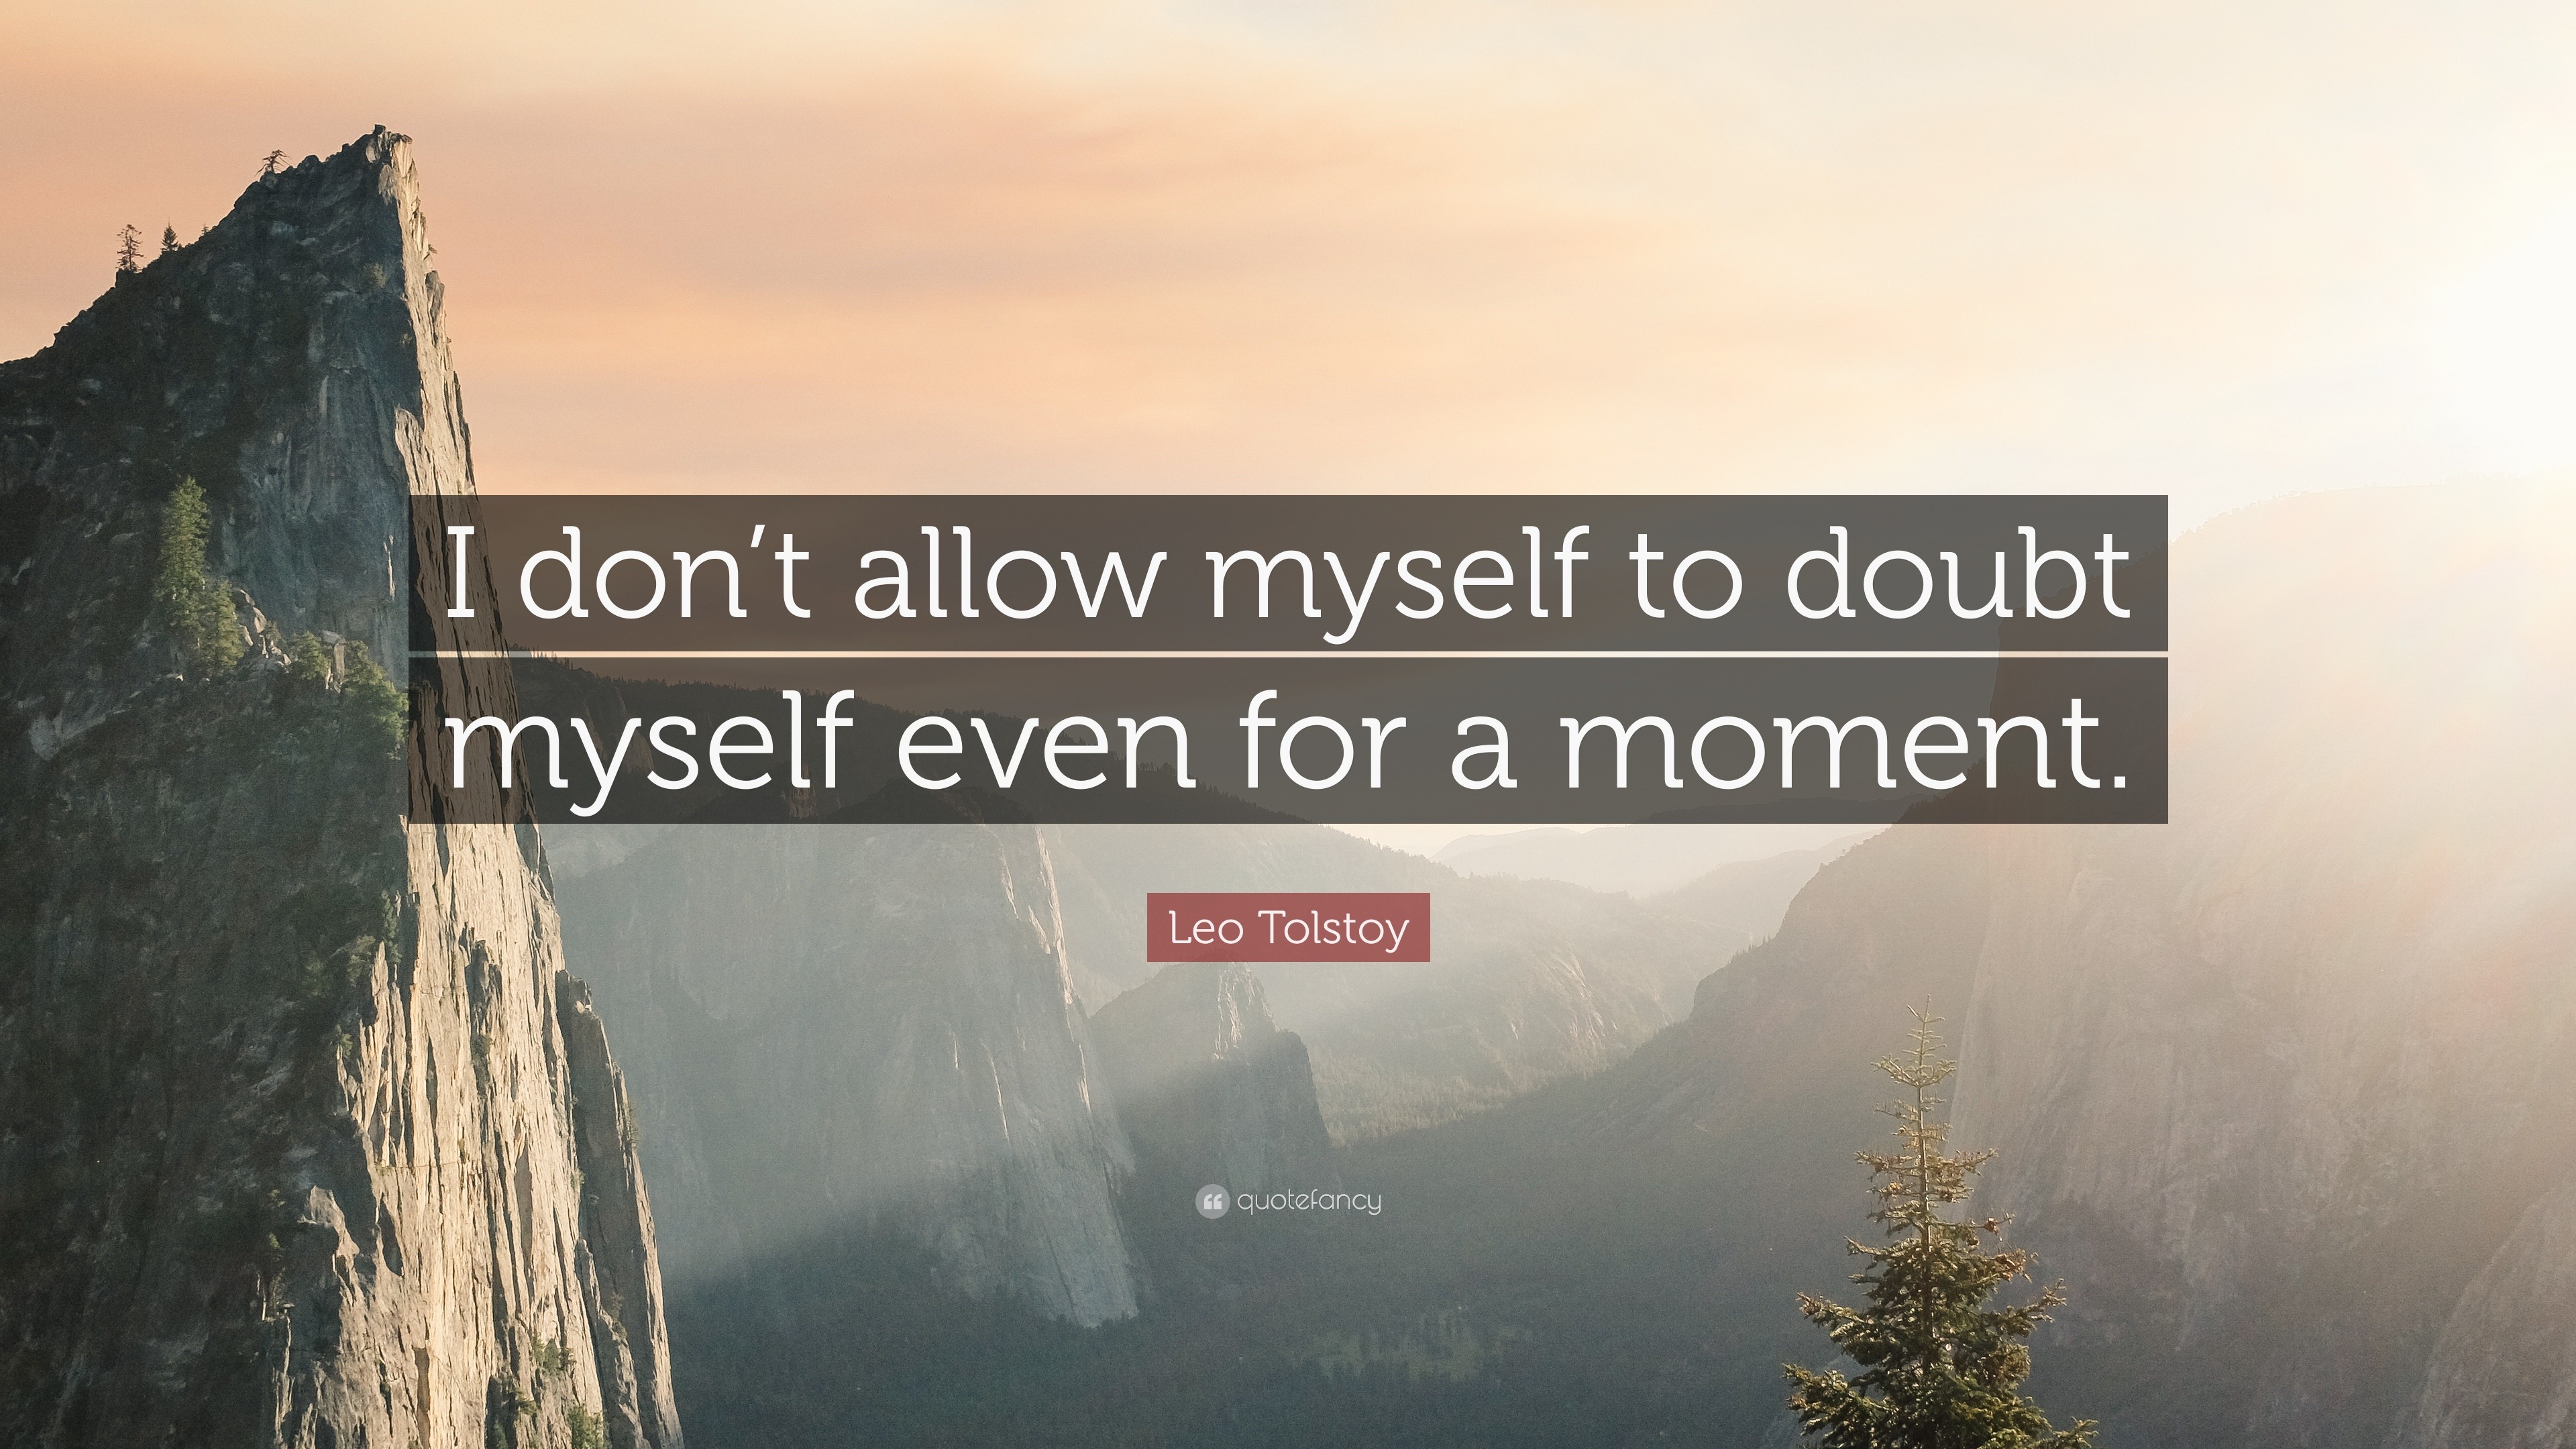 Leo Tolstoy Quote: “I don’t allow myself to doubt myself even for a ...